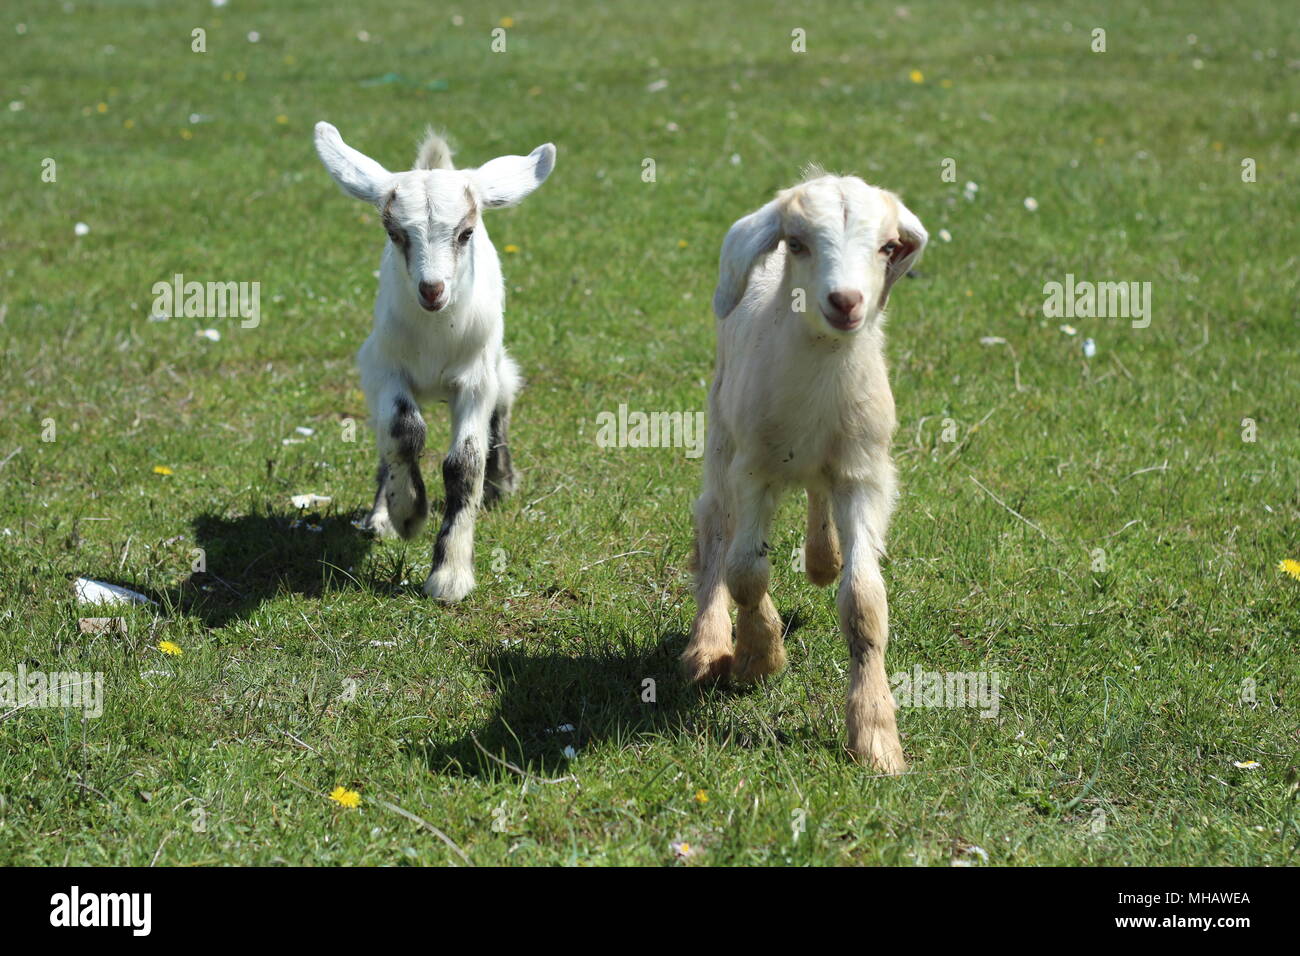 baby goats on grass in uludağ Stock Photo